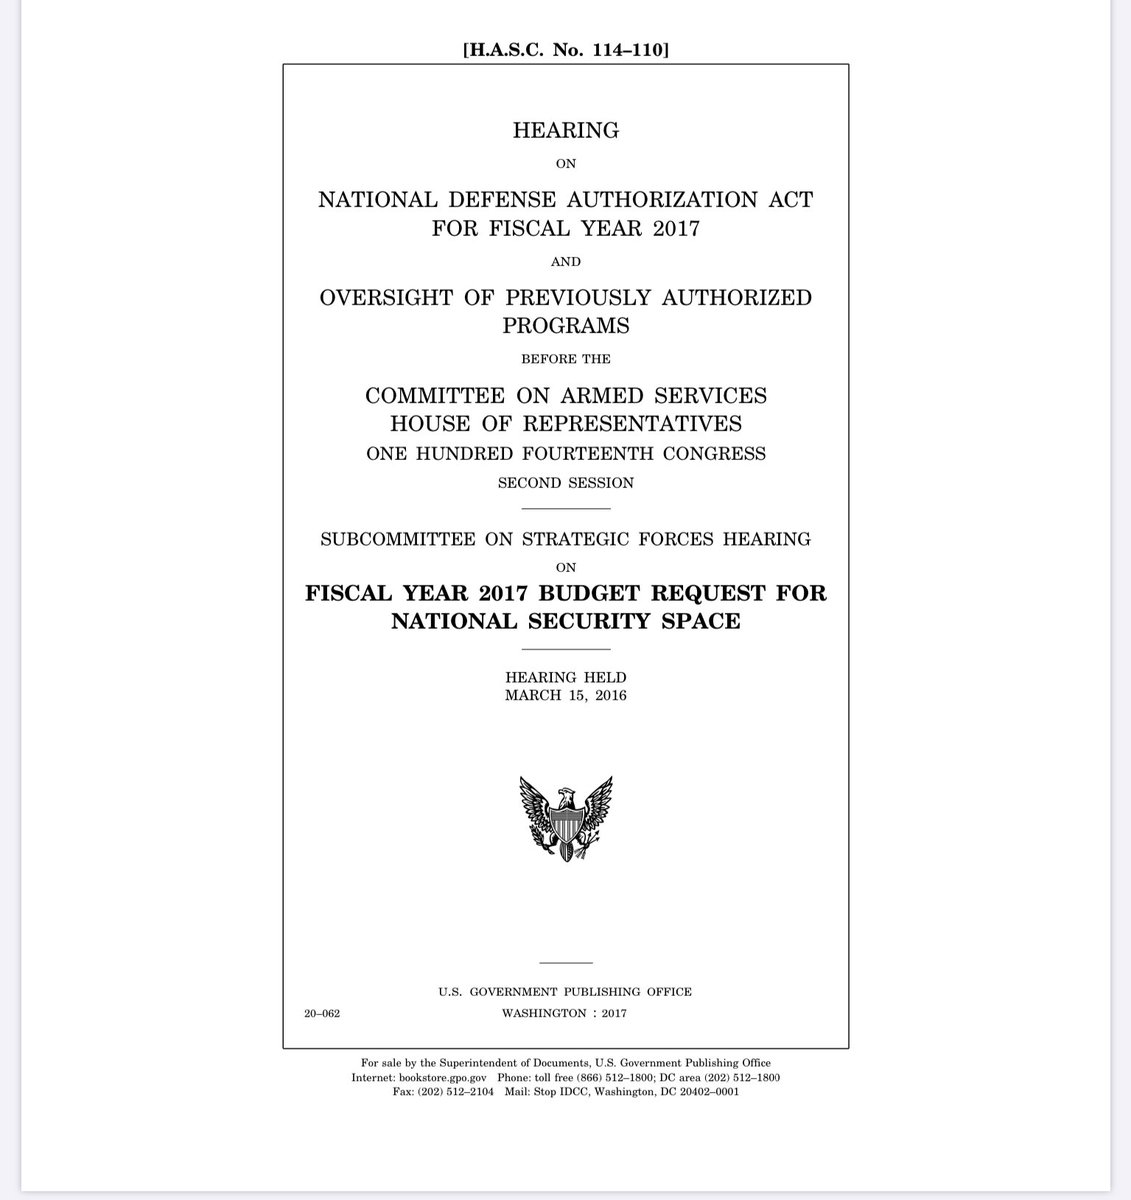 “Congressional Hearing 2016: Space Programs” https://fas.org/irp/congress/2016_hr/hasc-space.pdf